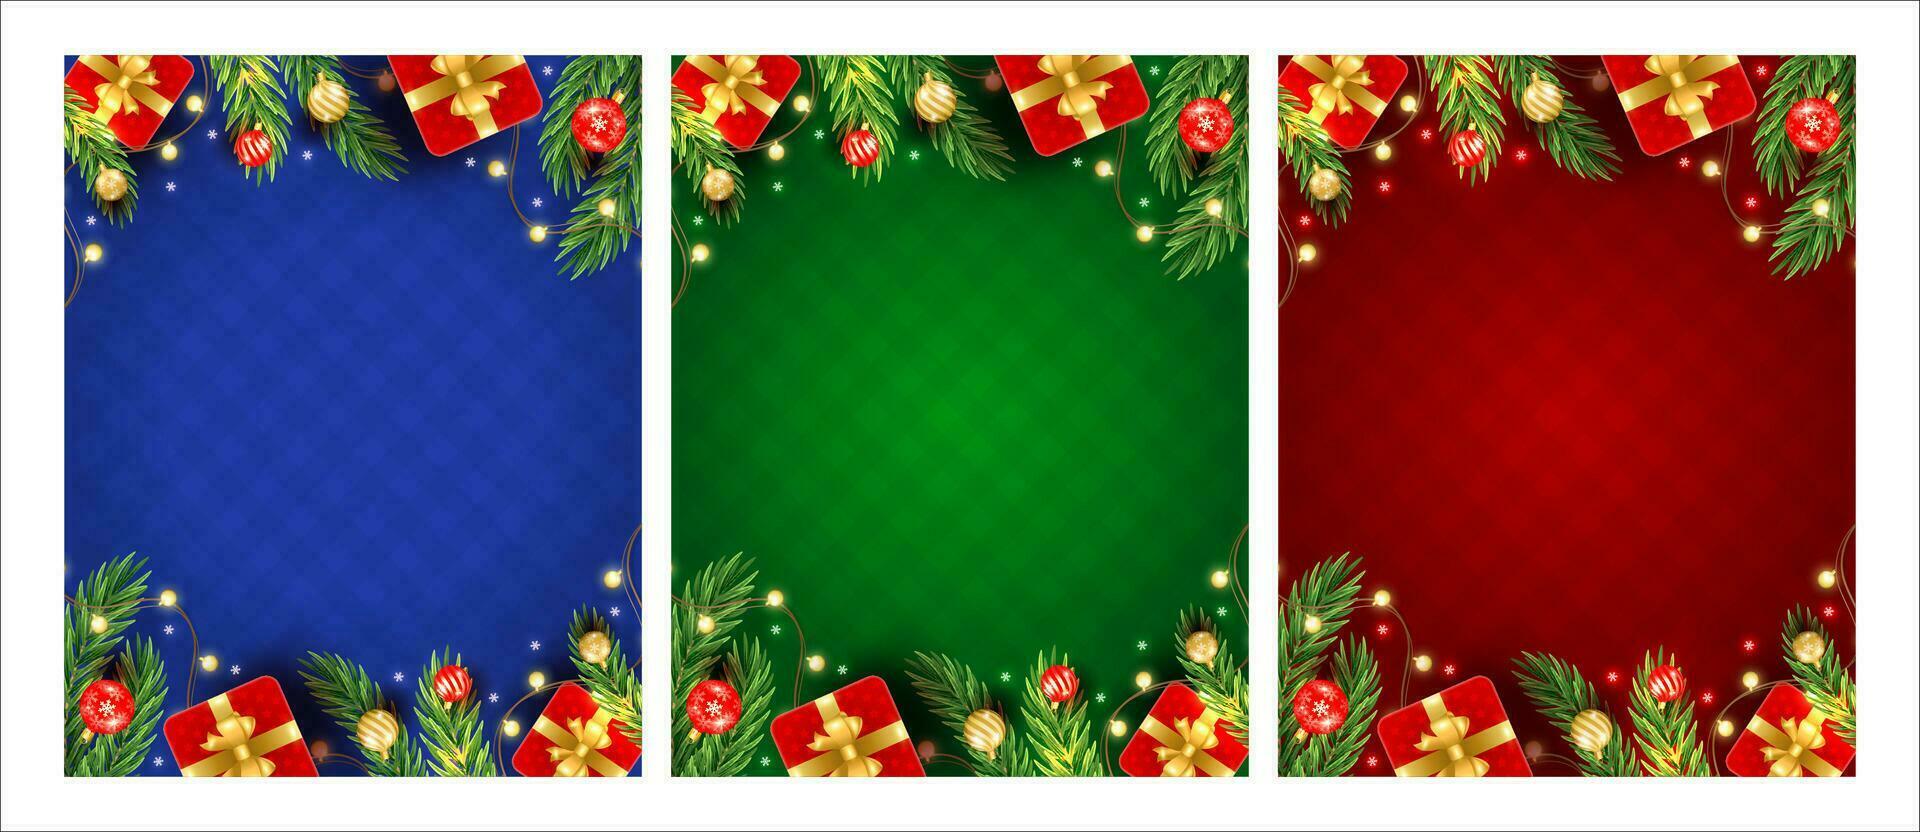 Merry Christmas and Happy New Year vertical background with Christmas branch, balls, snowflakes. For sale, banner, posters, cover design templates, social media wallpaper stories vector